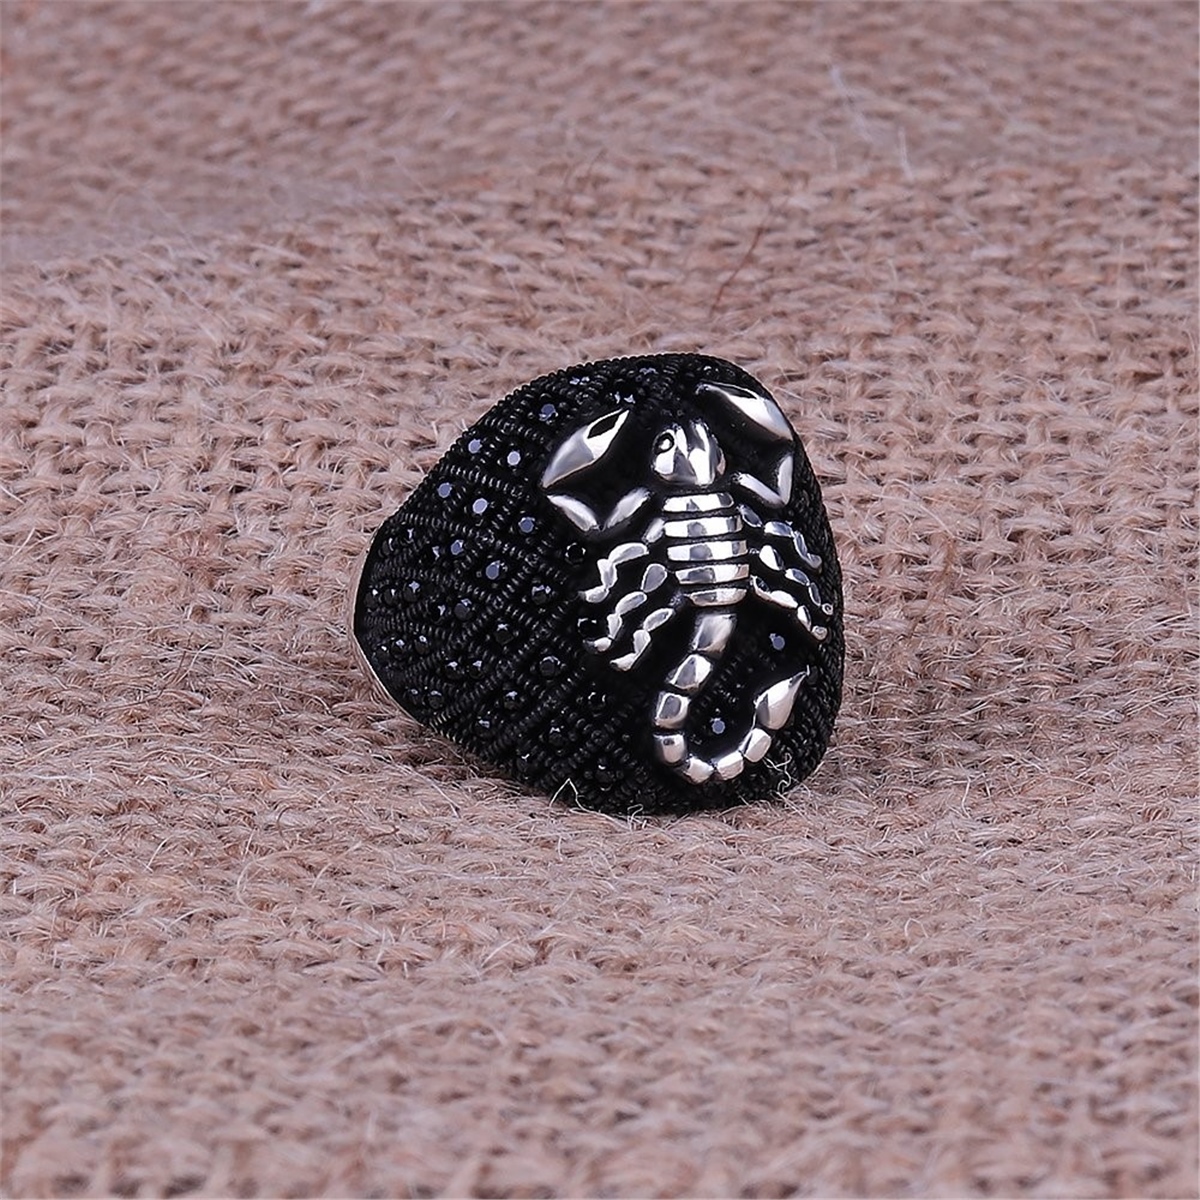 Scorpion Model Micro Stone Embroidered 925 Sterling Silver Men's Ring